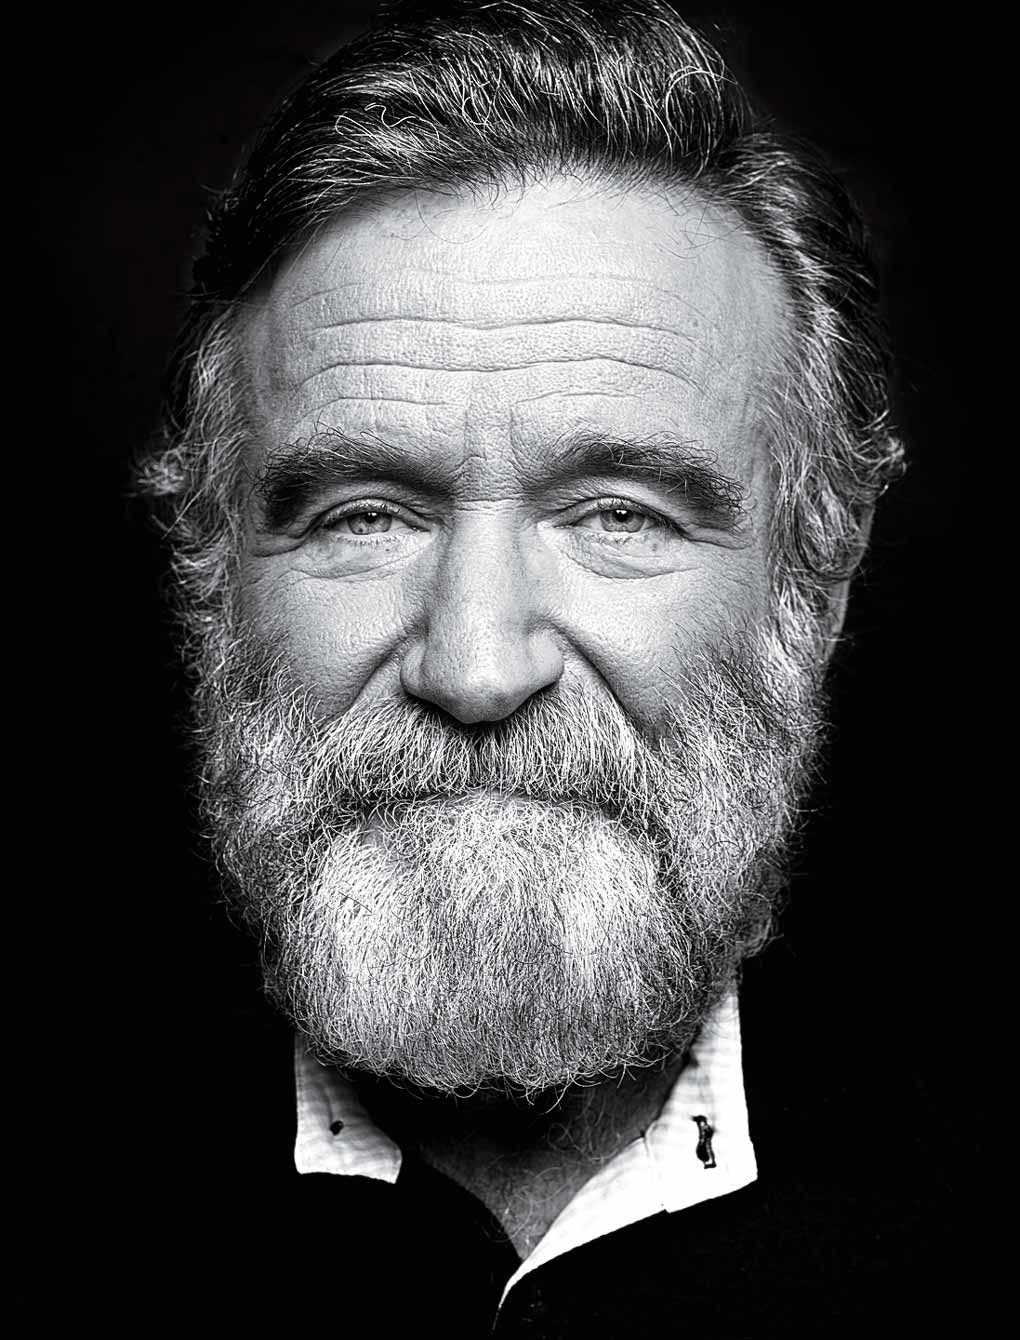 Robin Williams Portrait by Peter Hapak for TIME